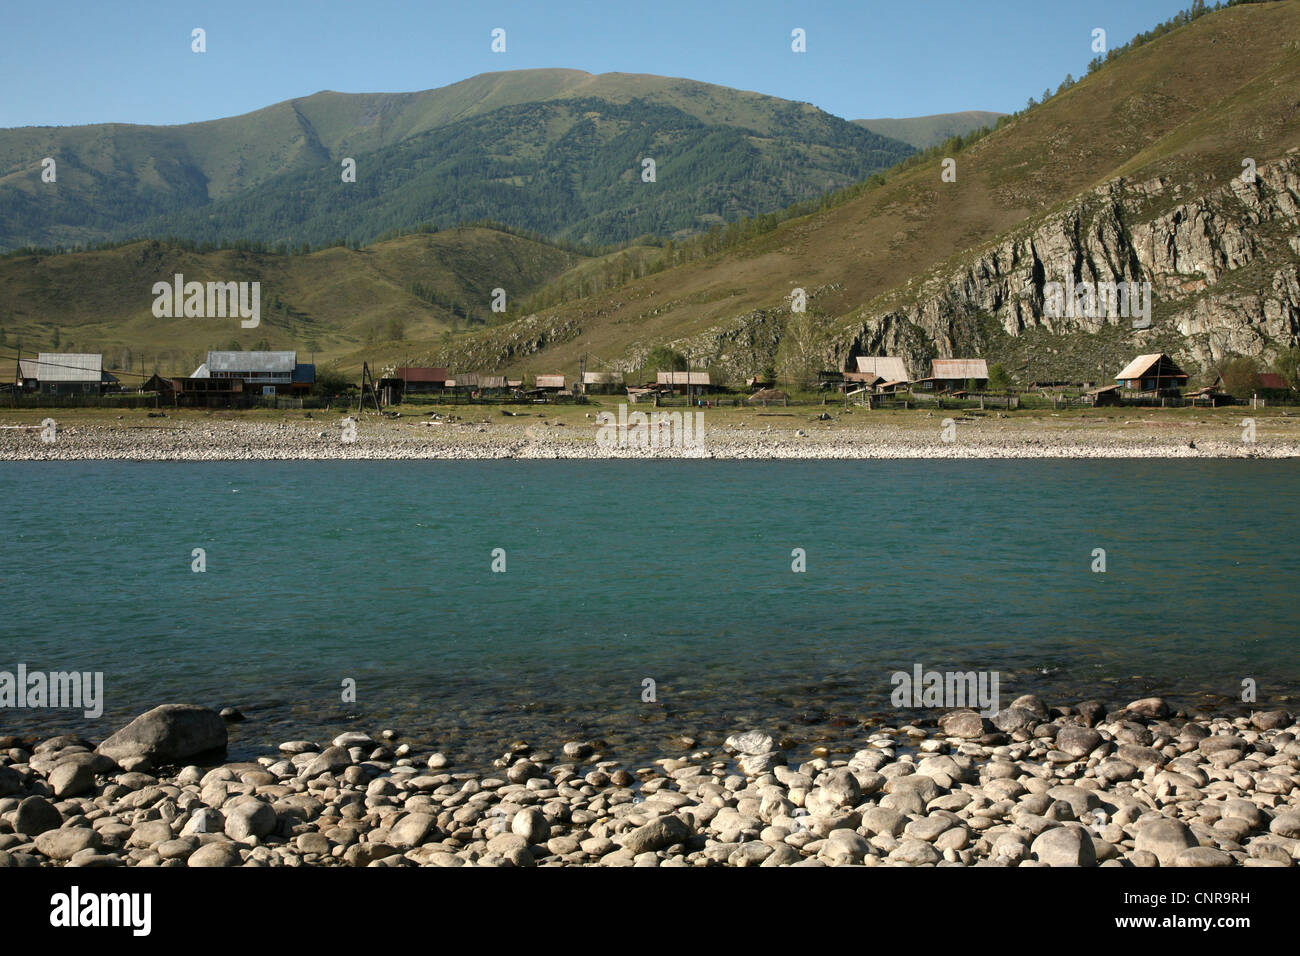 Tungur Village and the Katun River in the Altai Mountains, Russia. Stock Photo